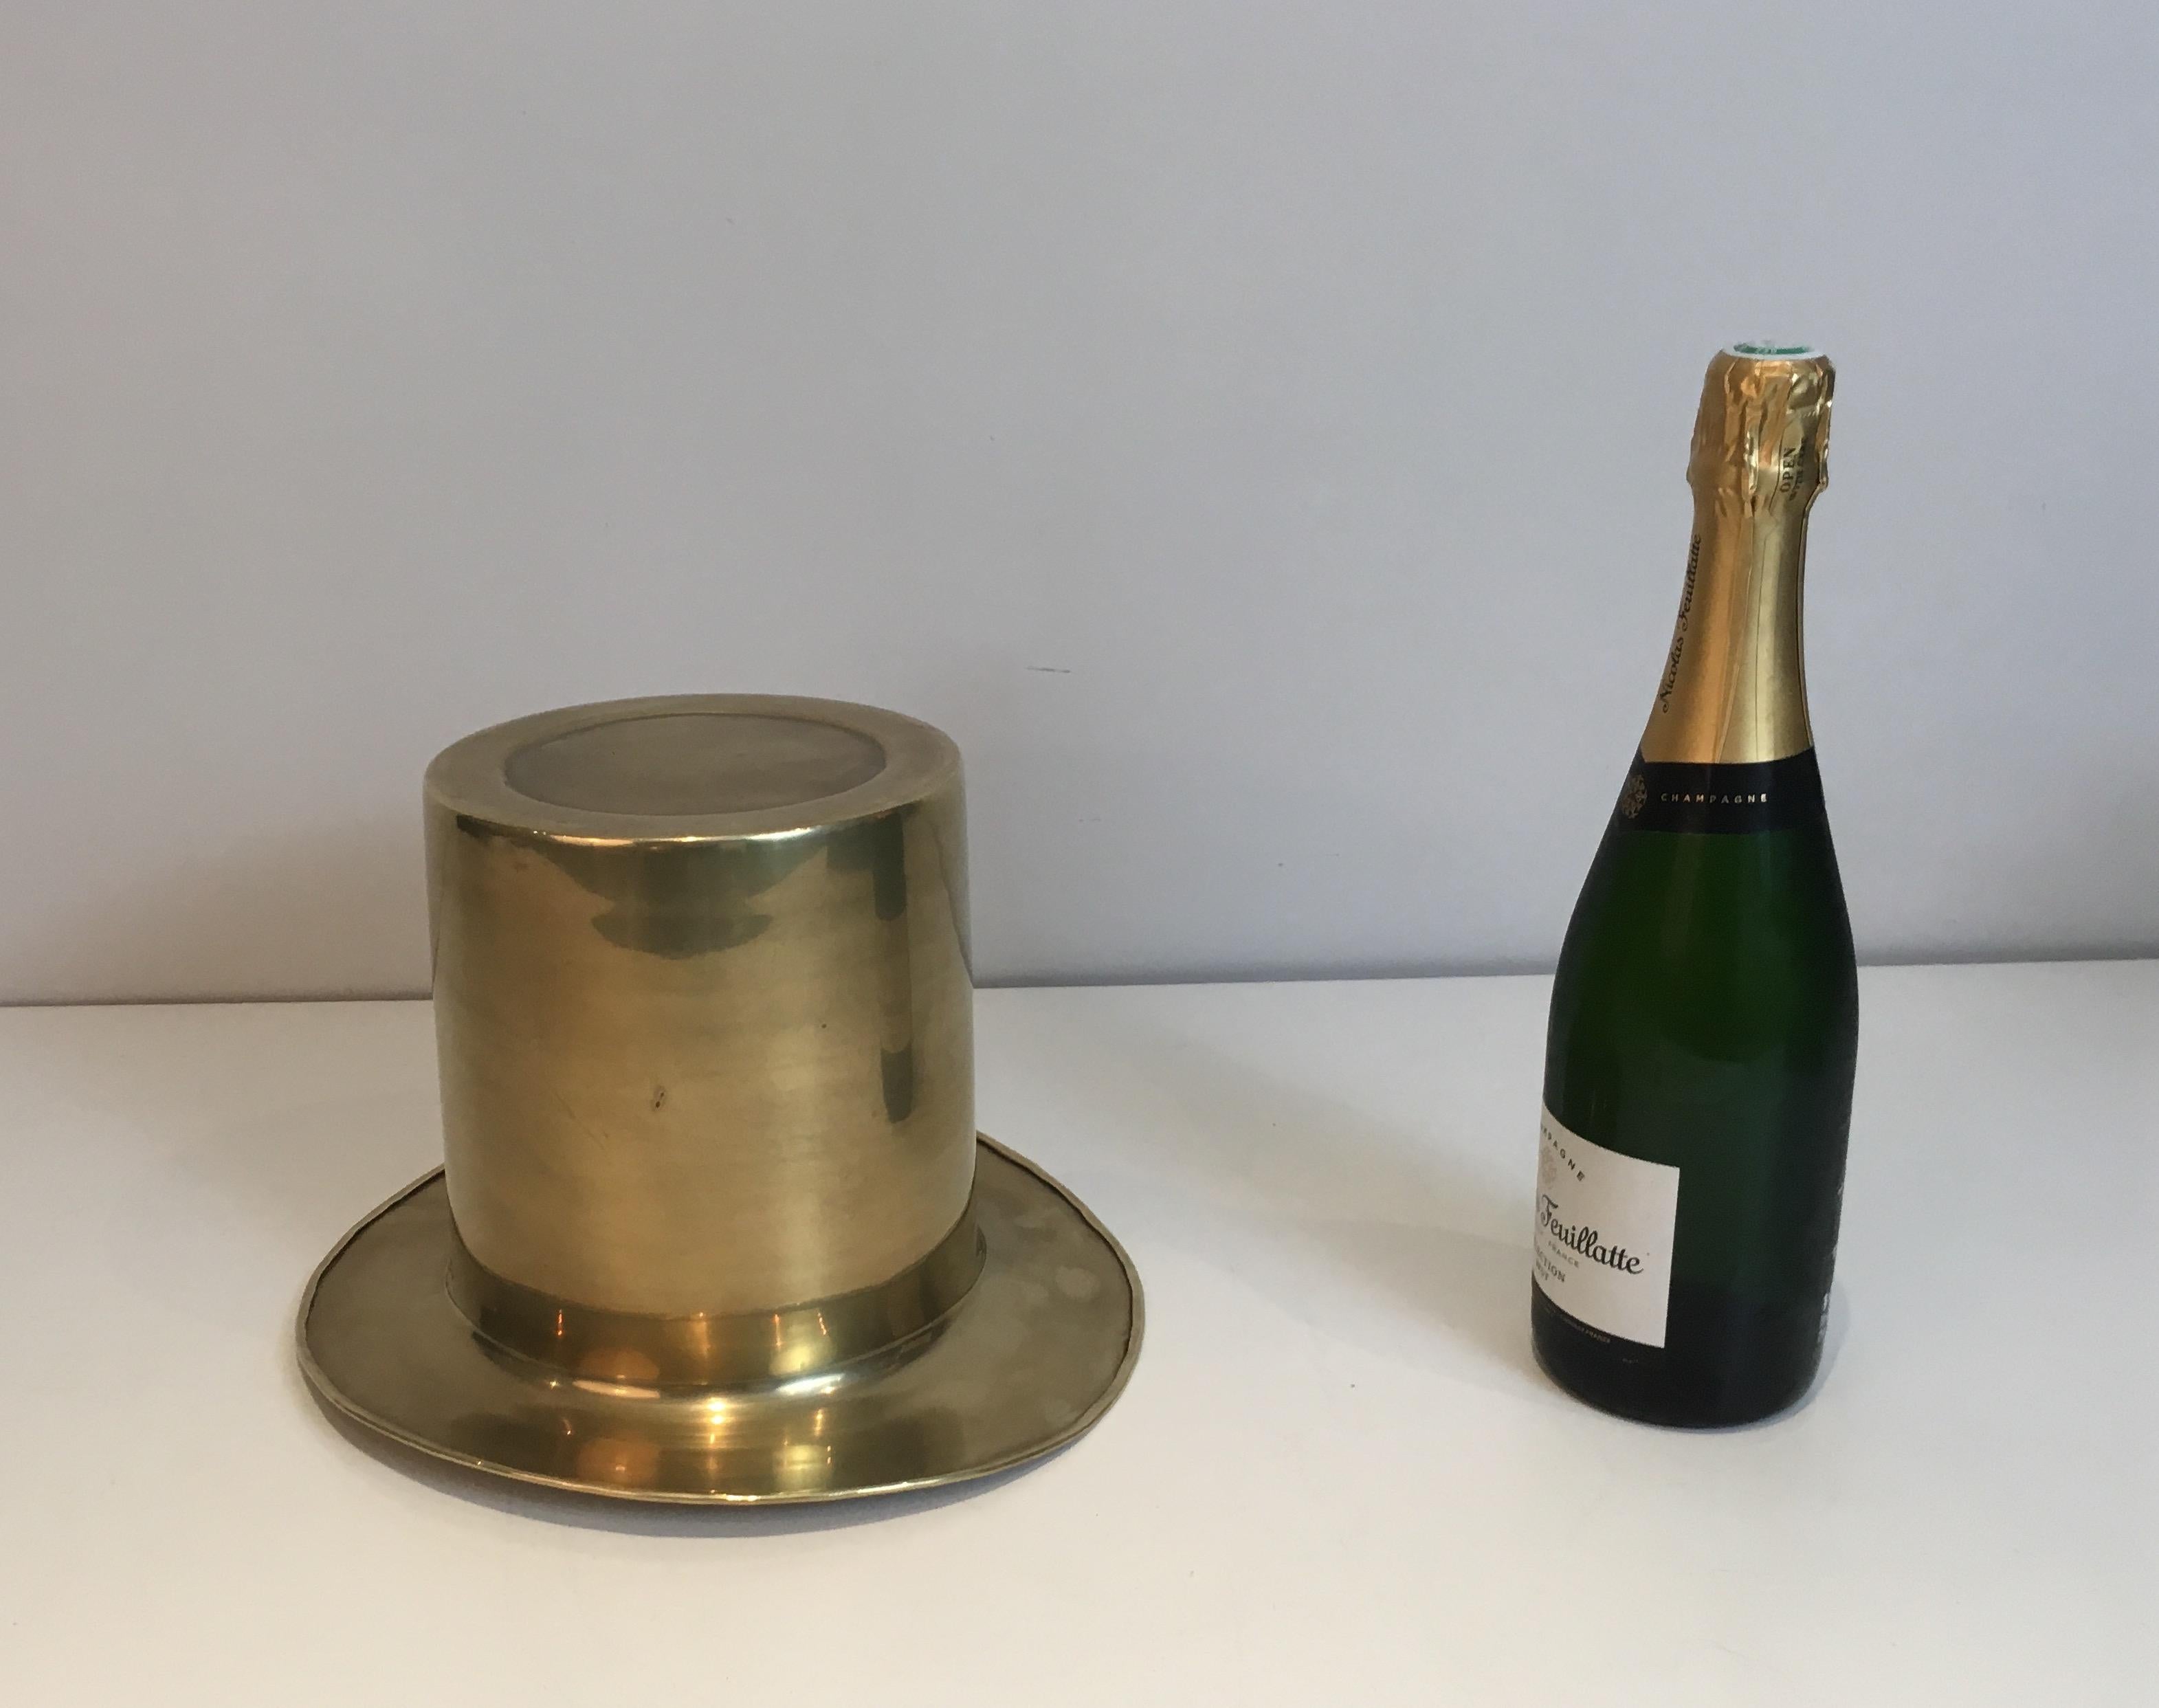 This unusual and decorative top hat champagne bucket is all made of brass. This is a French work, circa 1920.